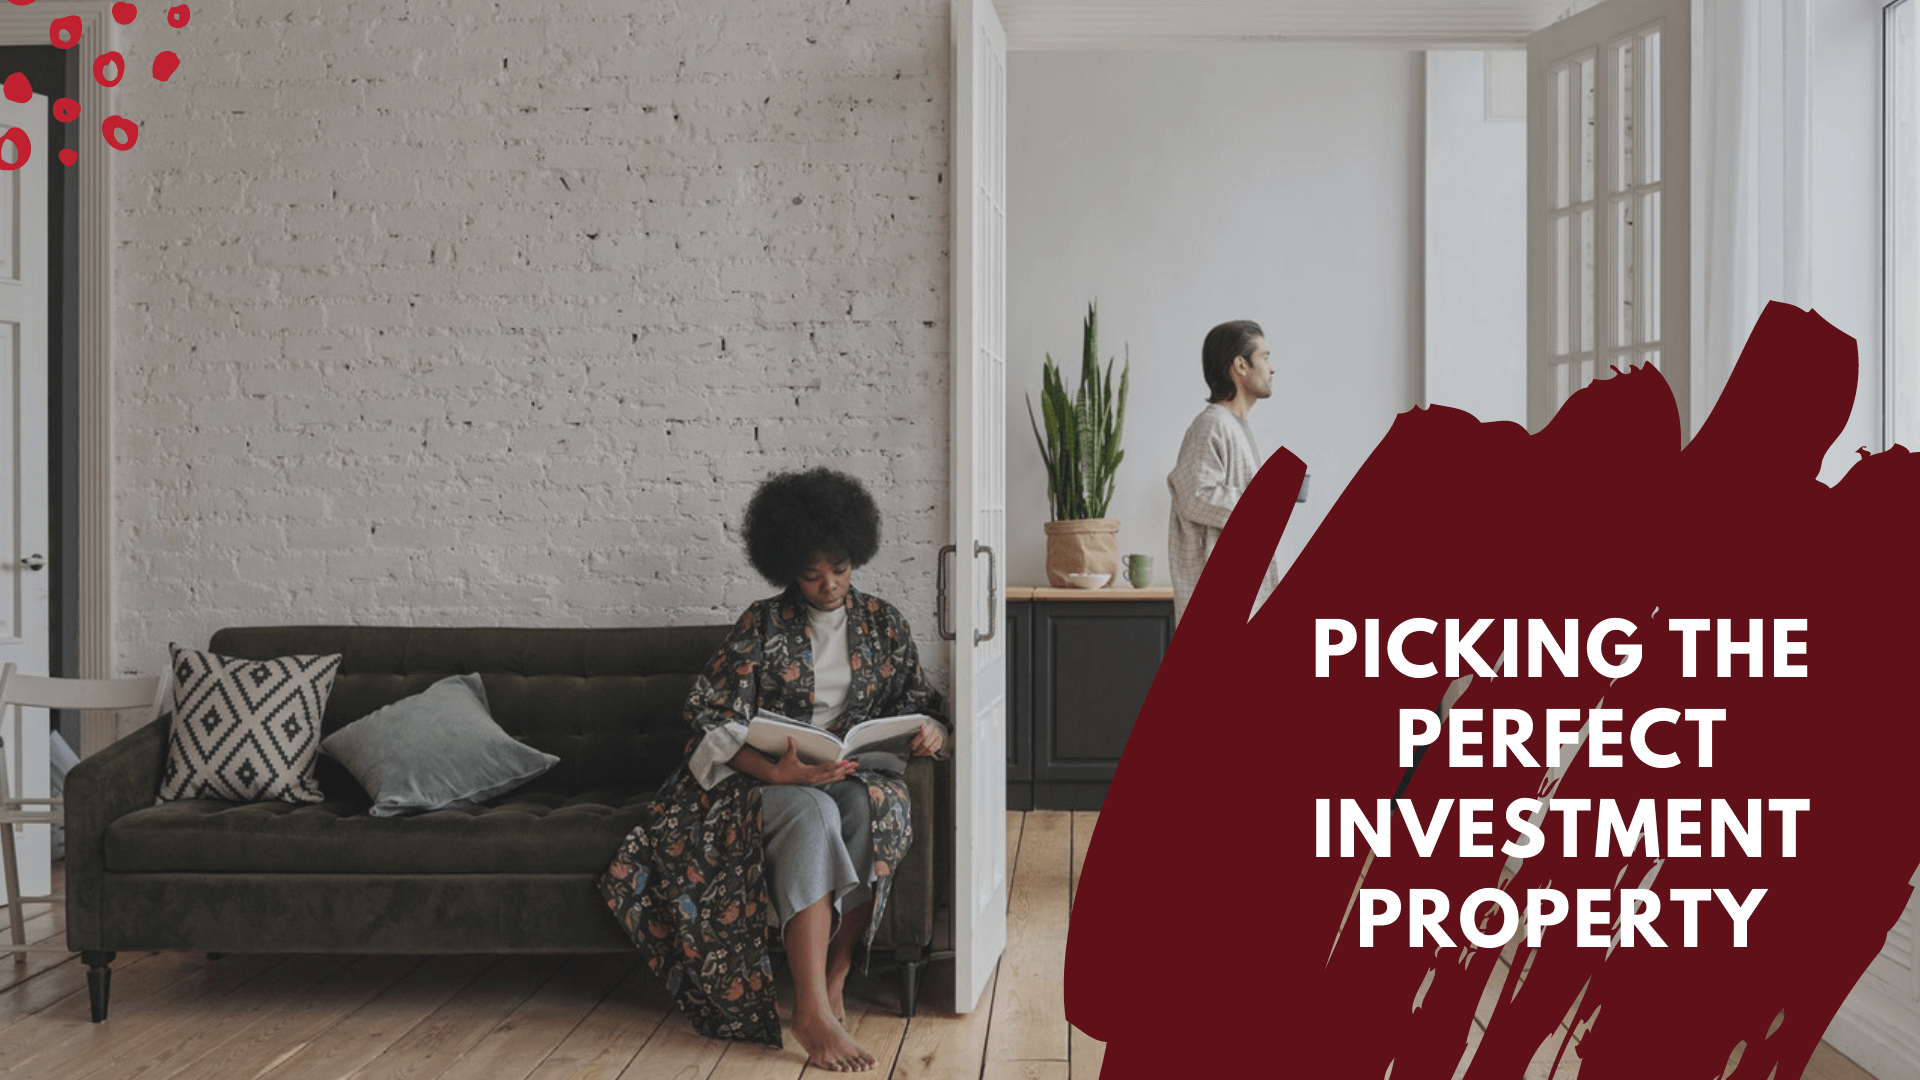 How to Pick the Perfect Investment Property in Santa Rosa